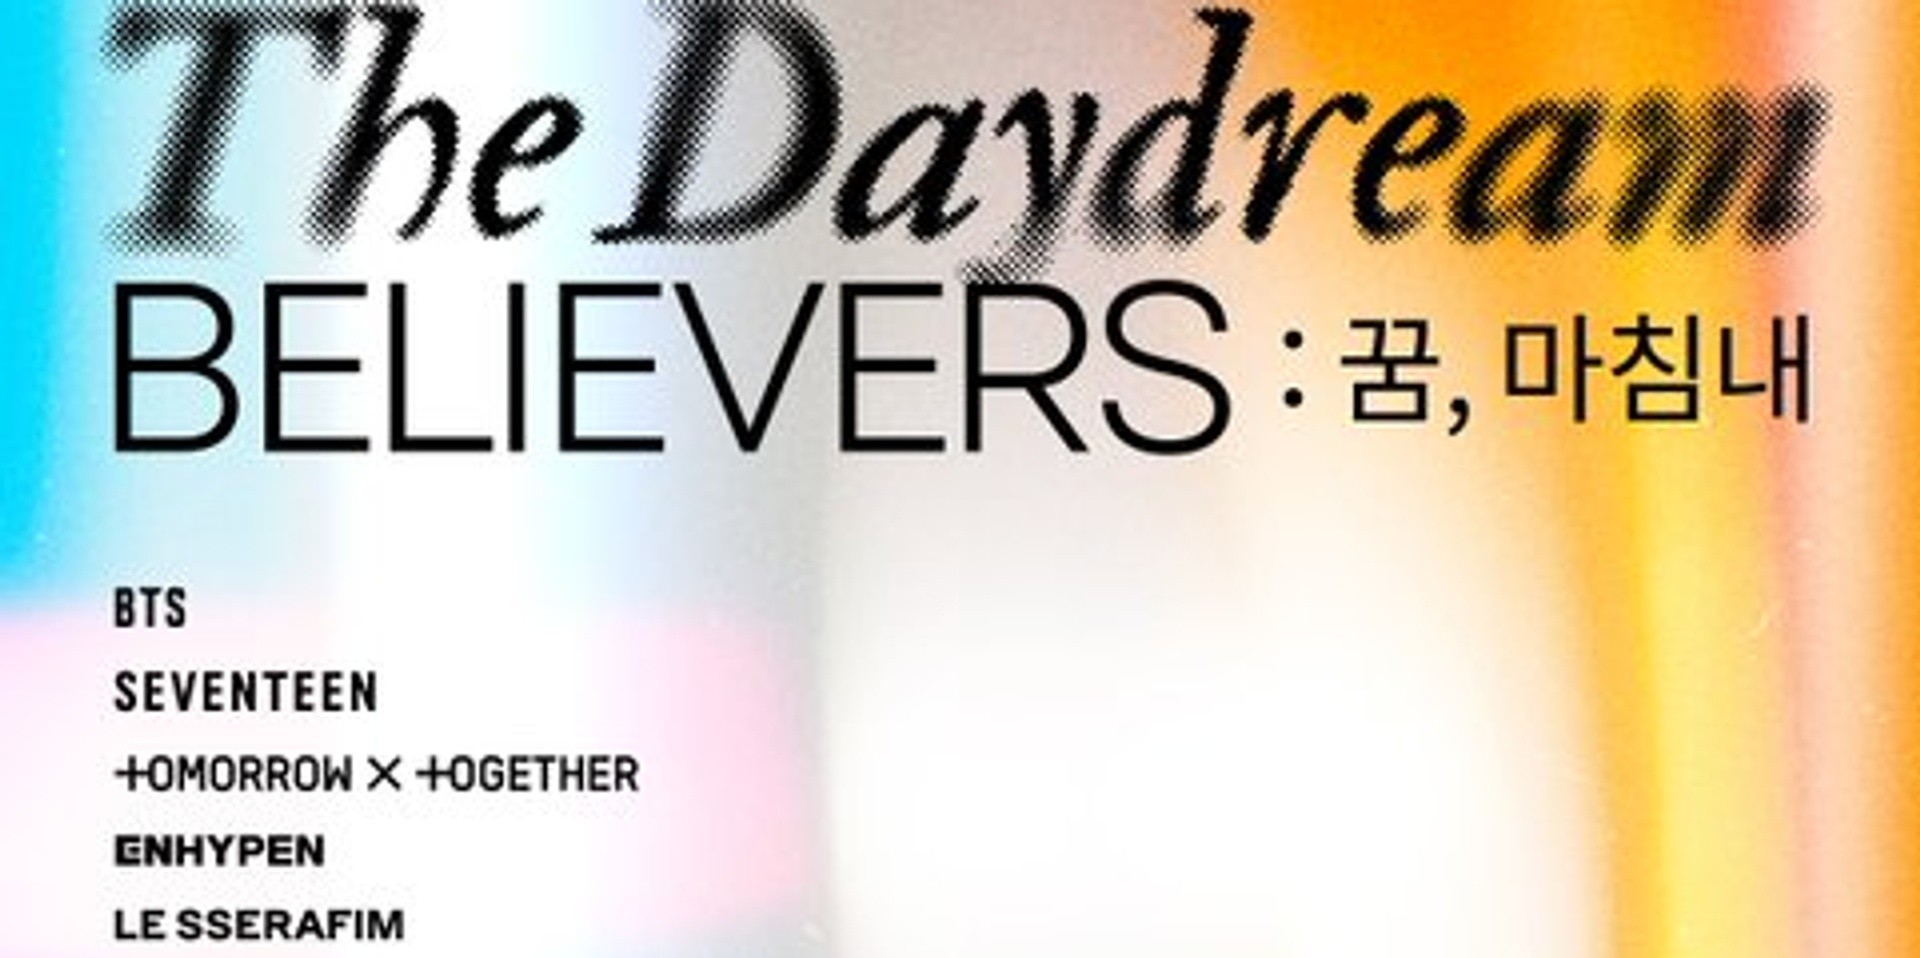 HYBE INSIGHT announces new exhibition 'The Daydream Believers'